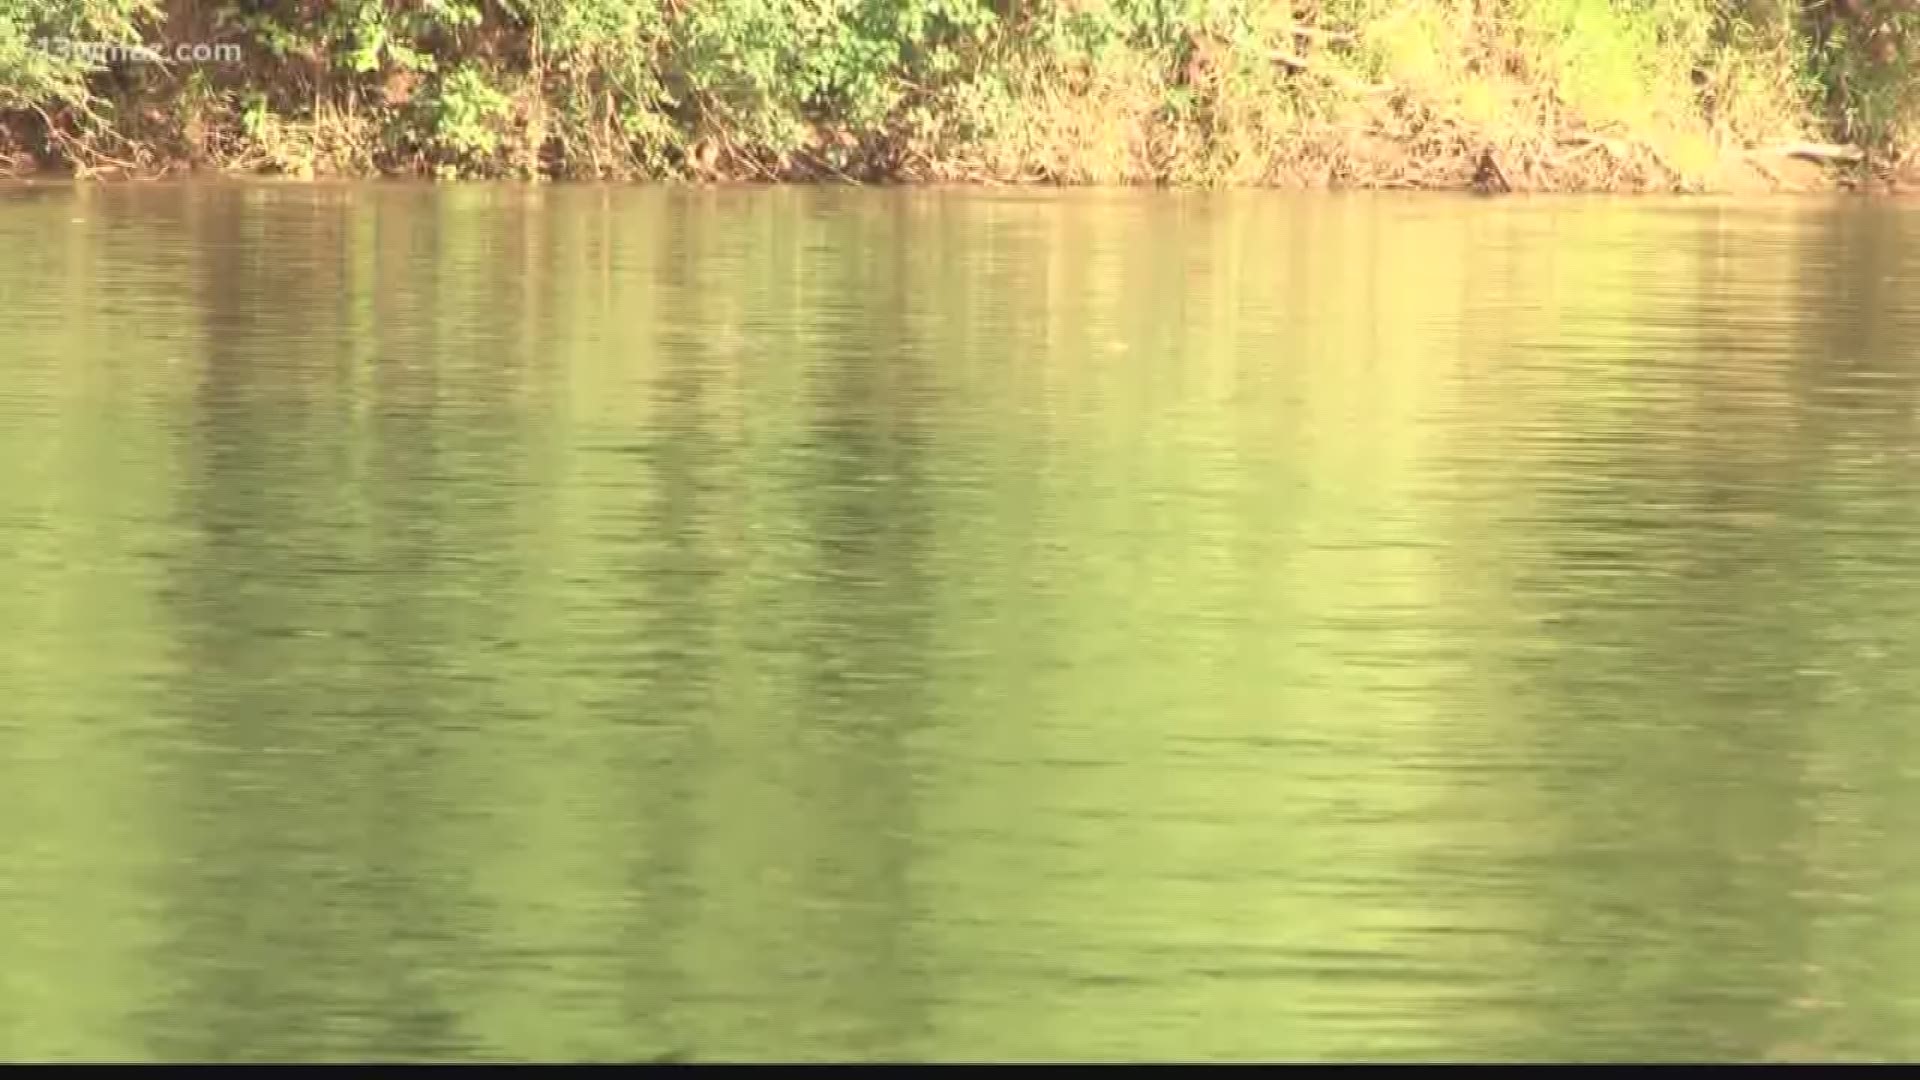 4 million gallons of sewage spills from manhole into Ocmulgee River